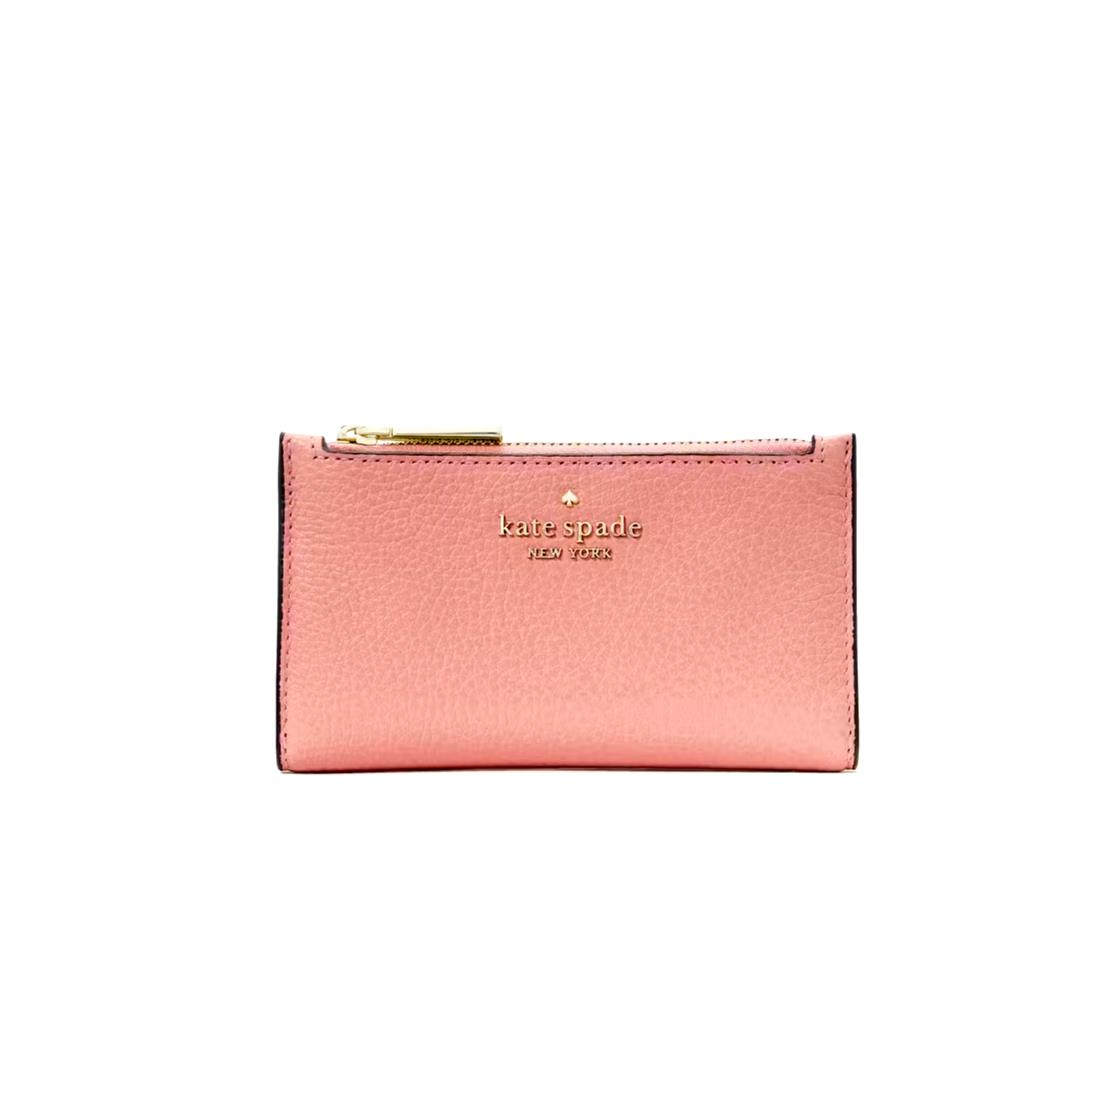 New Kate Spade Leila Small Slim Bifold Wallet Pebble Leather Peachy Rose